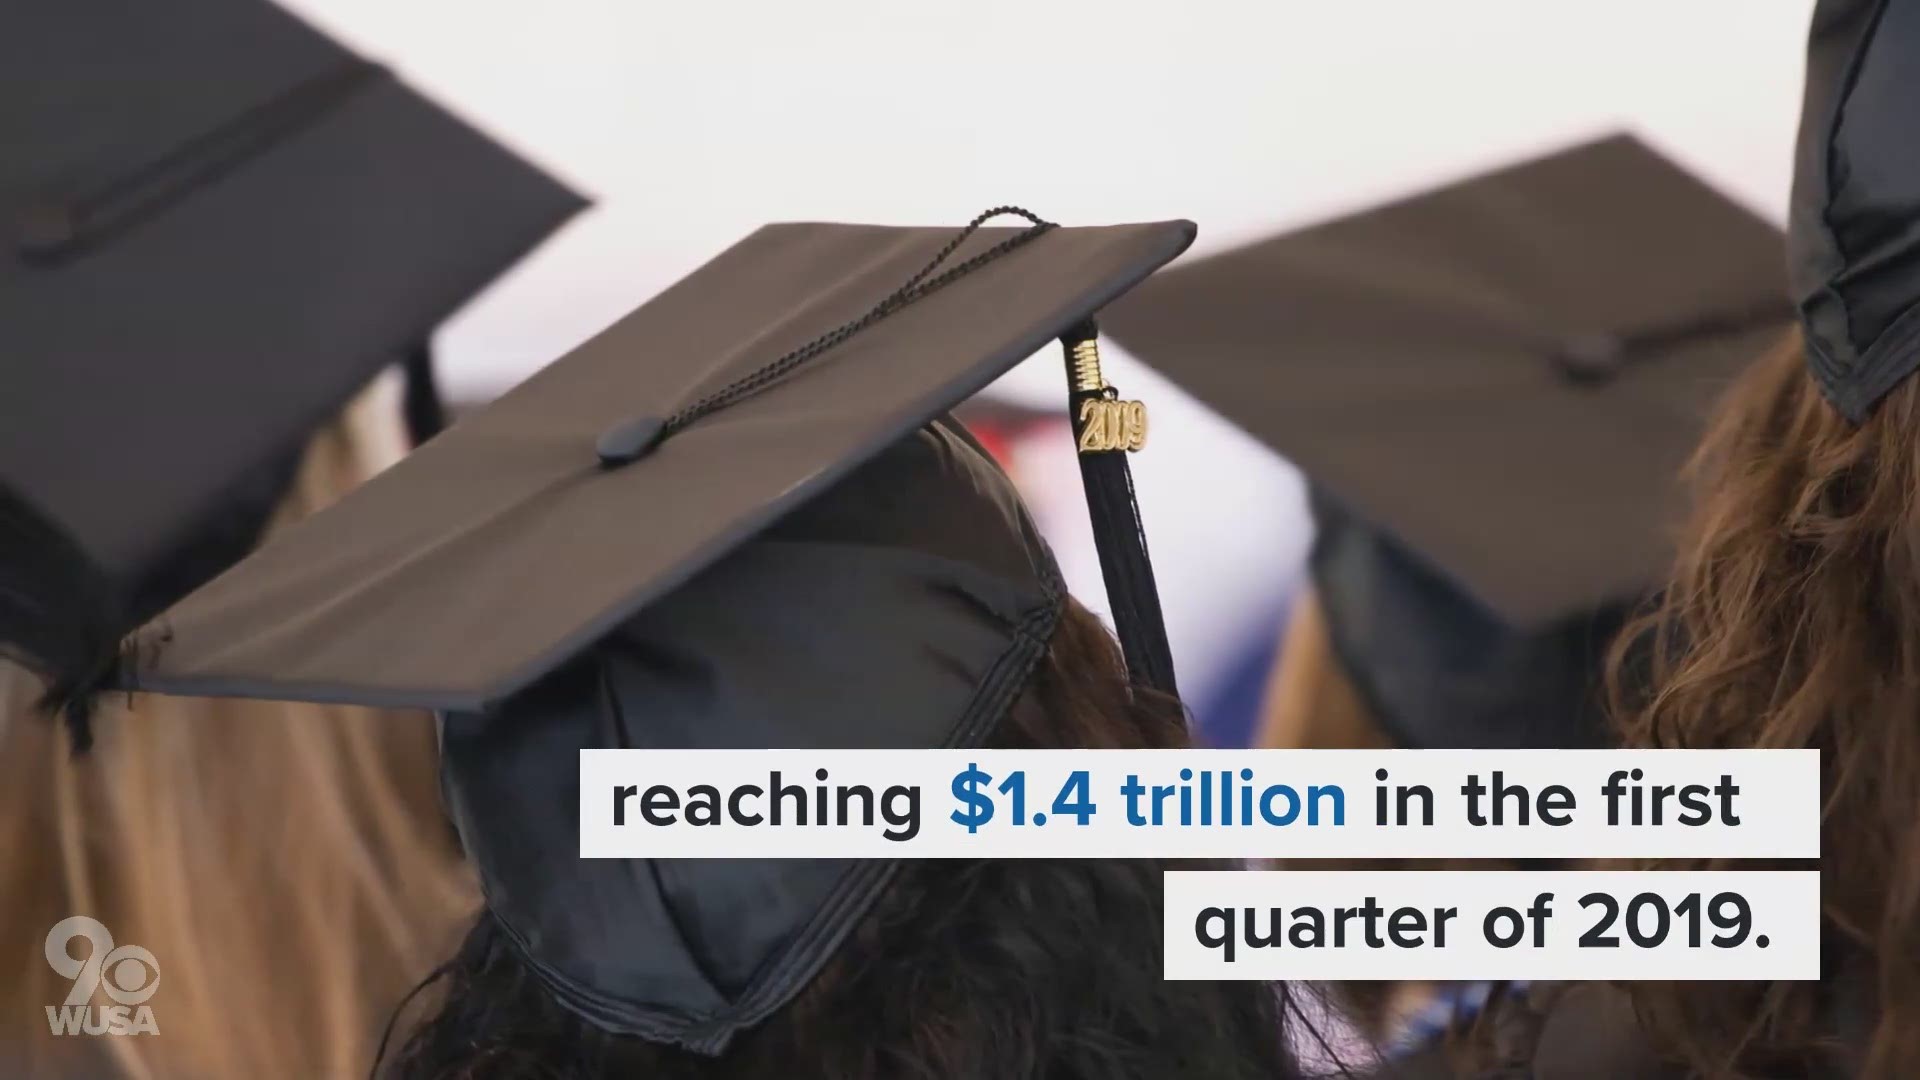 Student loan debt reached an all-time high in the first quarter of 2019.